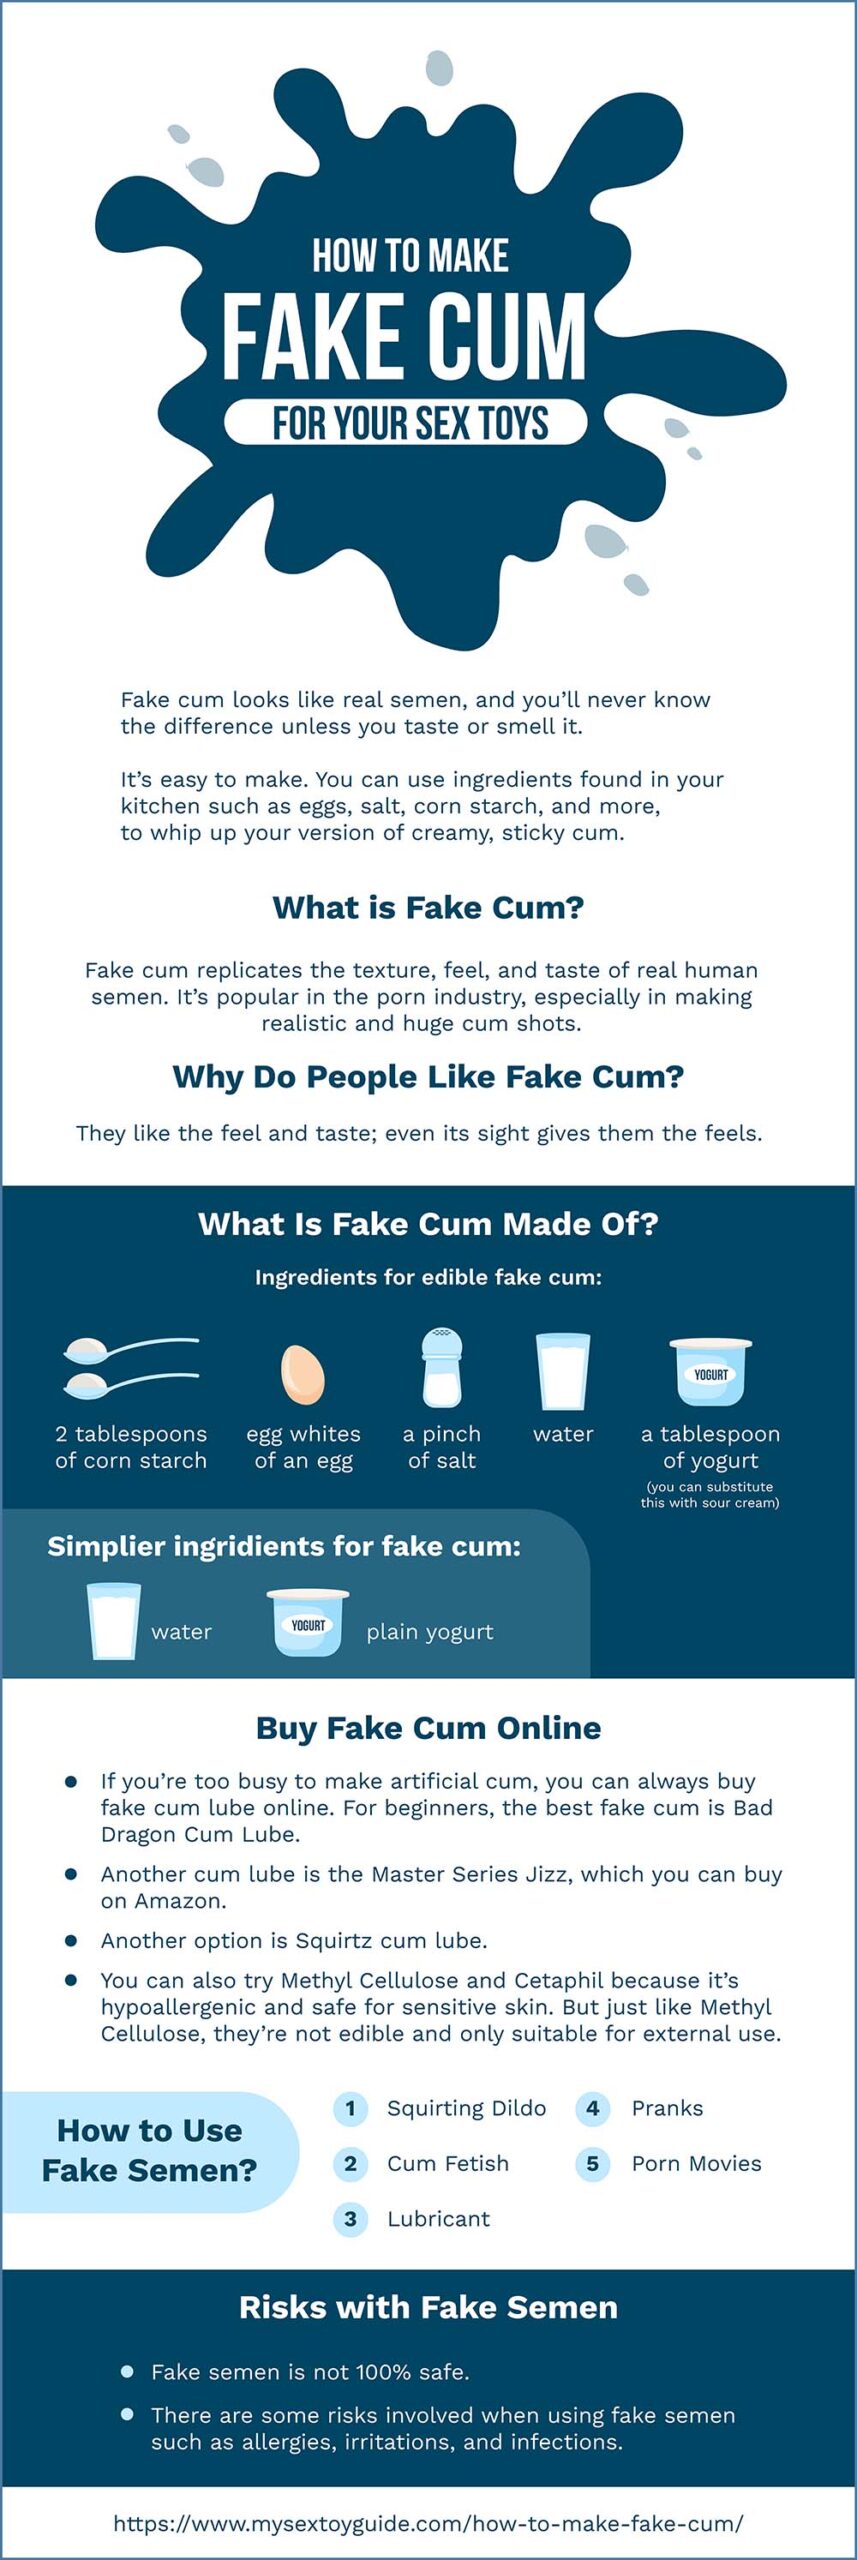 How to Make Fake Cum For Your Sex Toys Fake Cum Recipes picture image